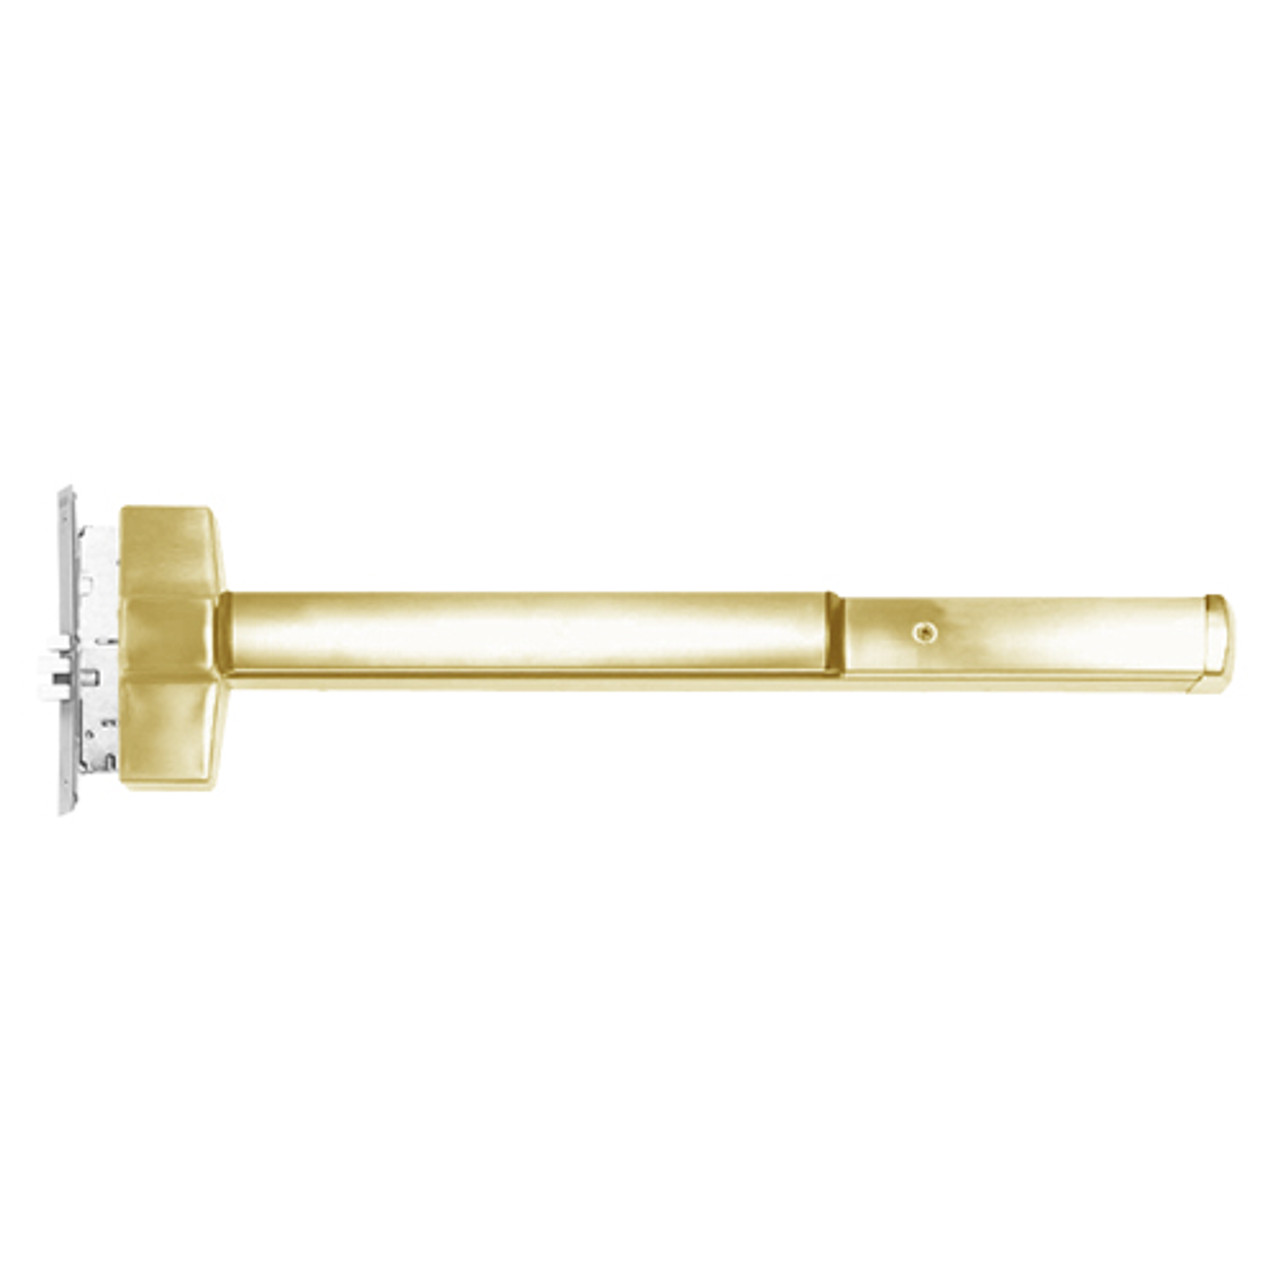 ED5600TD-606-RHR Corbin ED5600 Series Non Fire Rated Mortise Exit Device with Delayed Egress in Satin Brass Finish